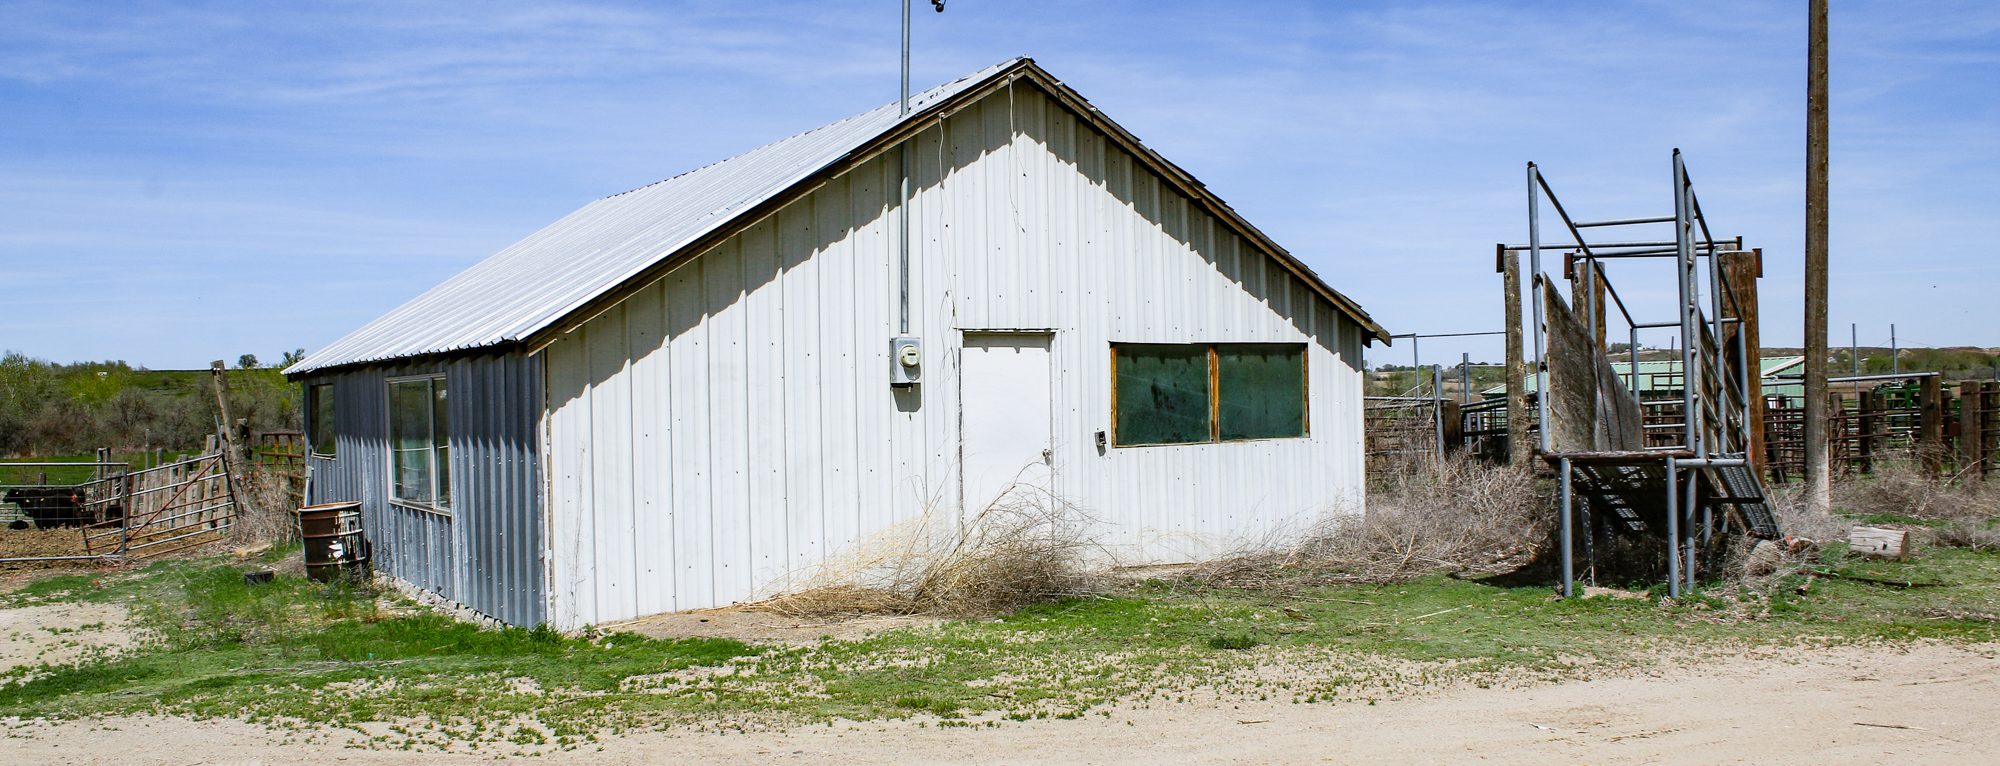 Homedale Cattle Ranch office or storage.